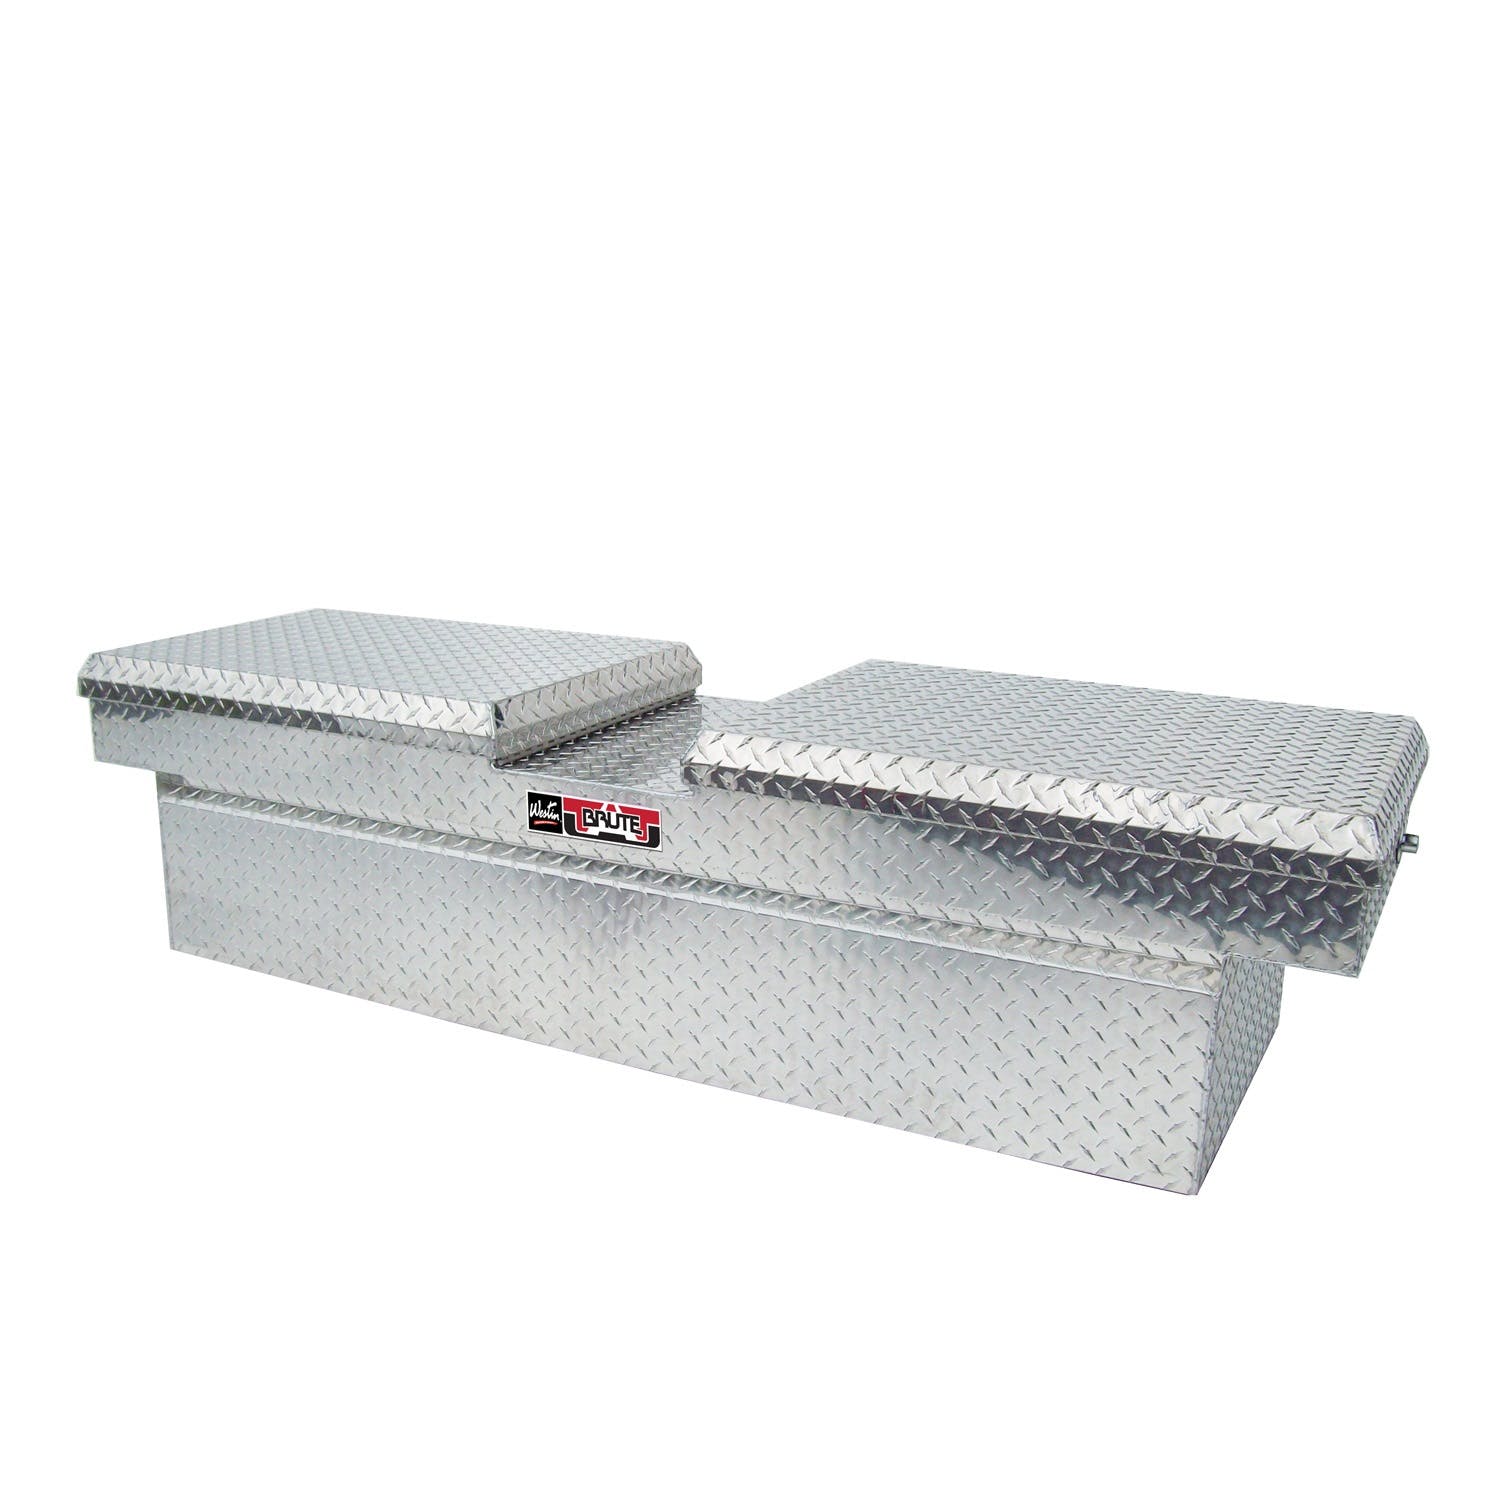 Westin Automotive 80-RB124GW Gull Wing Lid Full Size Standard Overall Dims: 71x20x18 Base Dims: 60x20x11